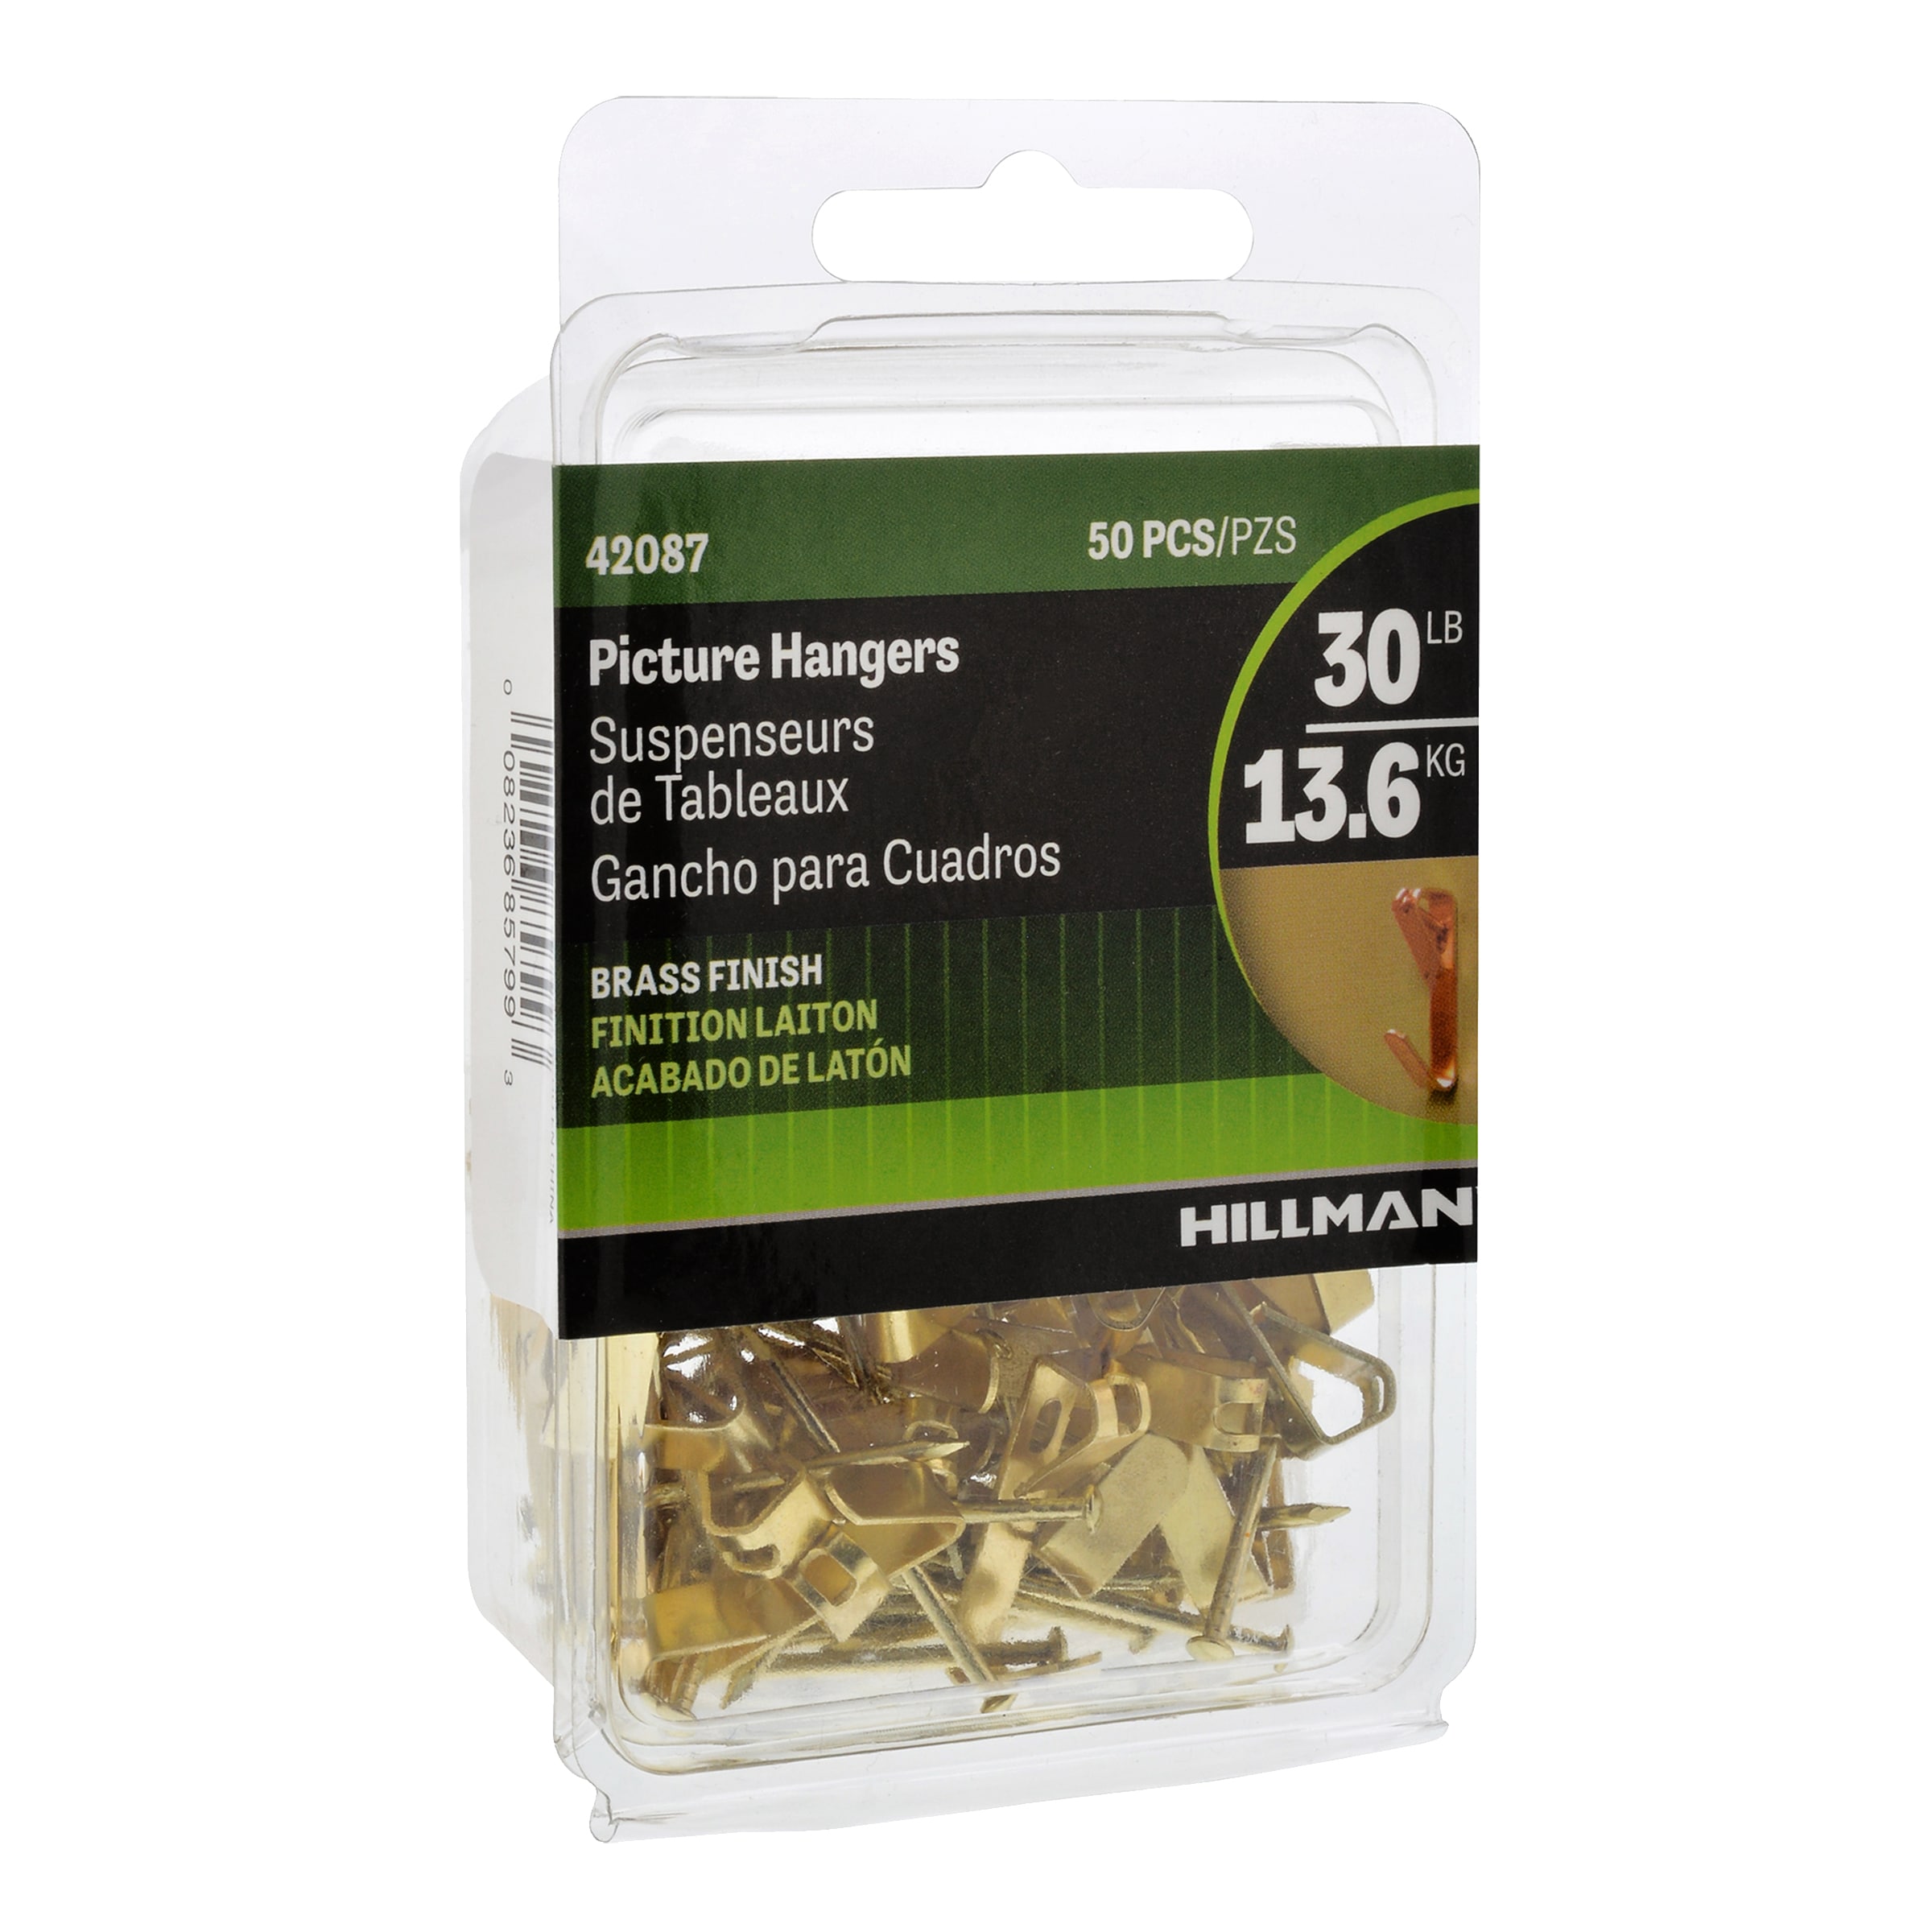 Hillman Picture Hangers Value Pack Brass 30 Lbs (25 Piece) in the